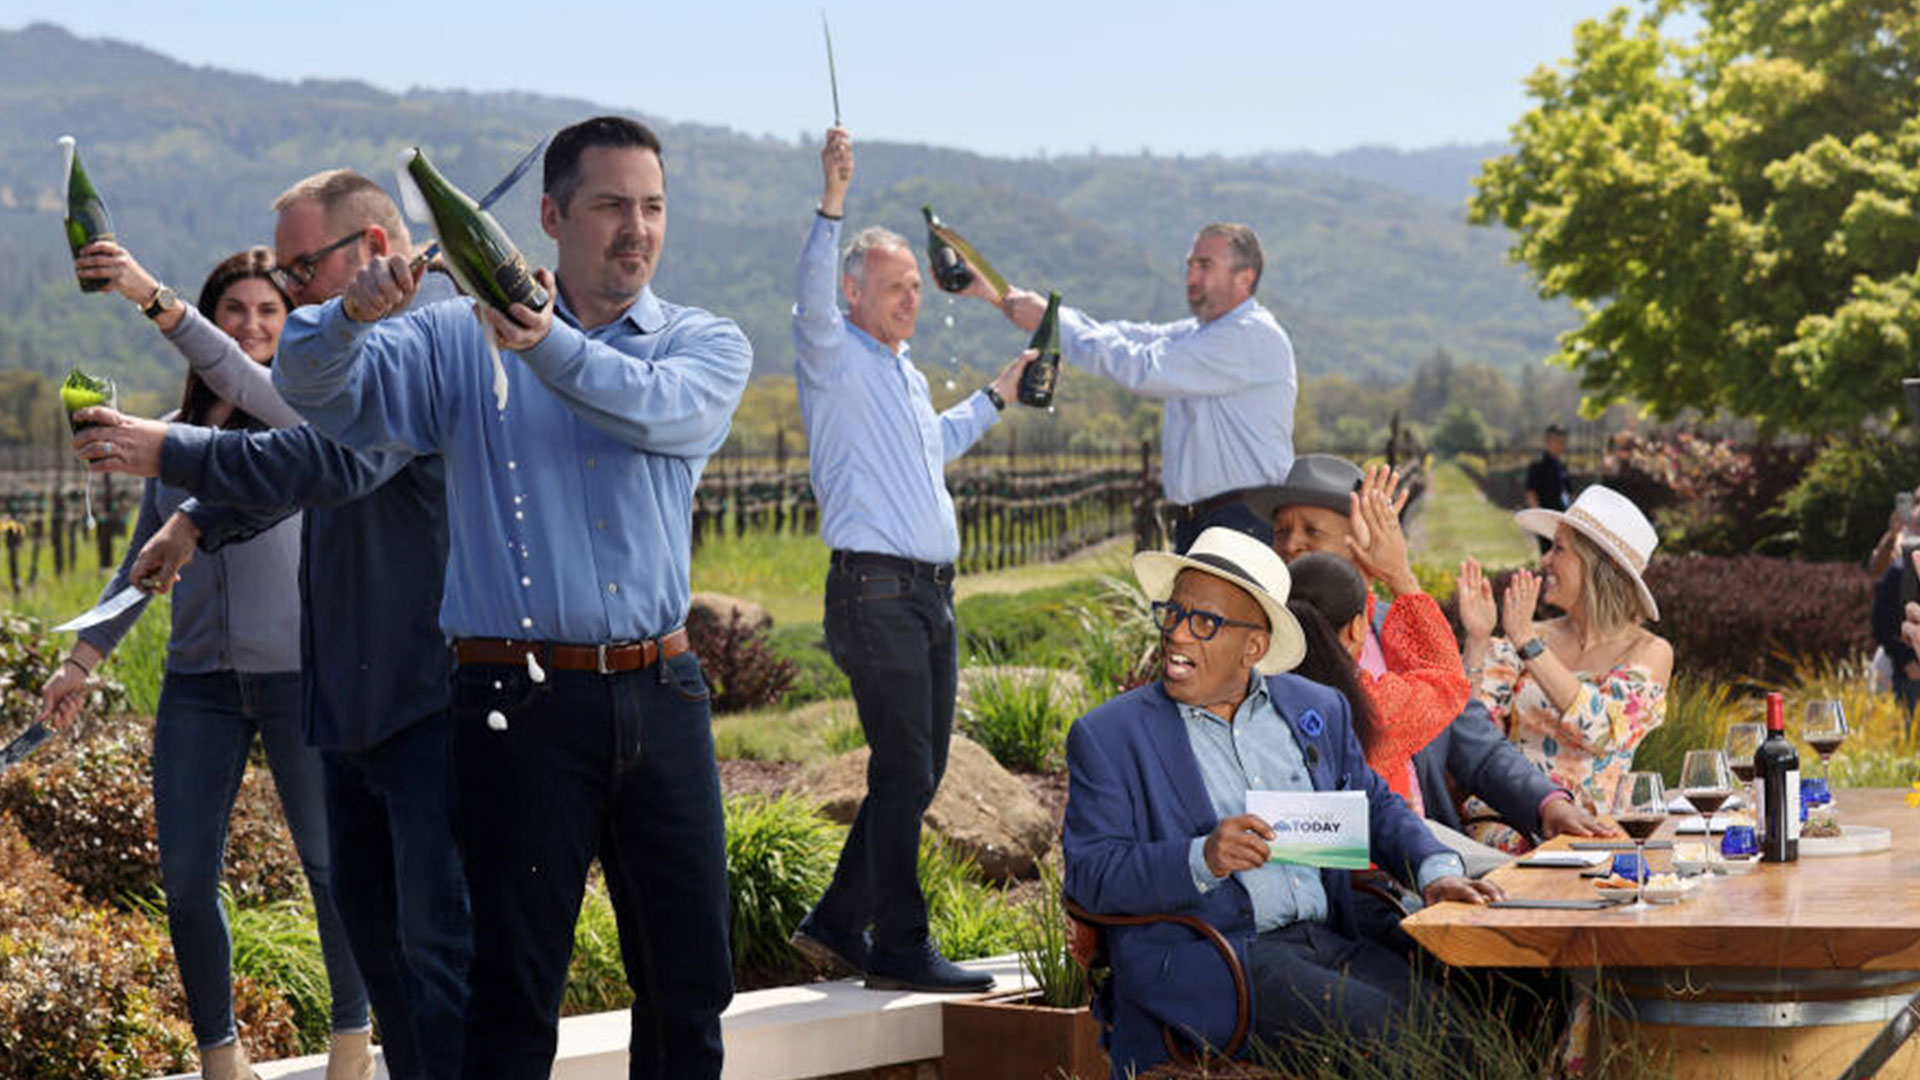 NBC’s 3rd Hour of the Today Show Visits St. Francis Winery